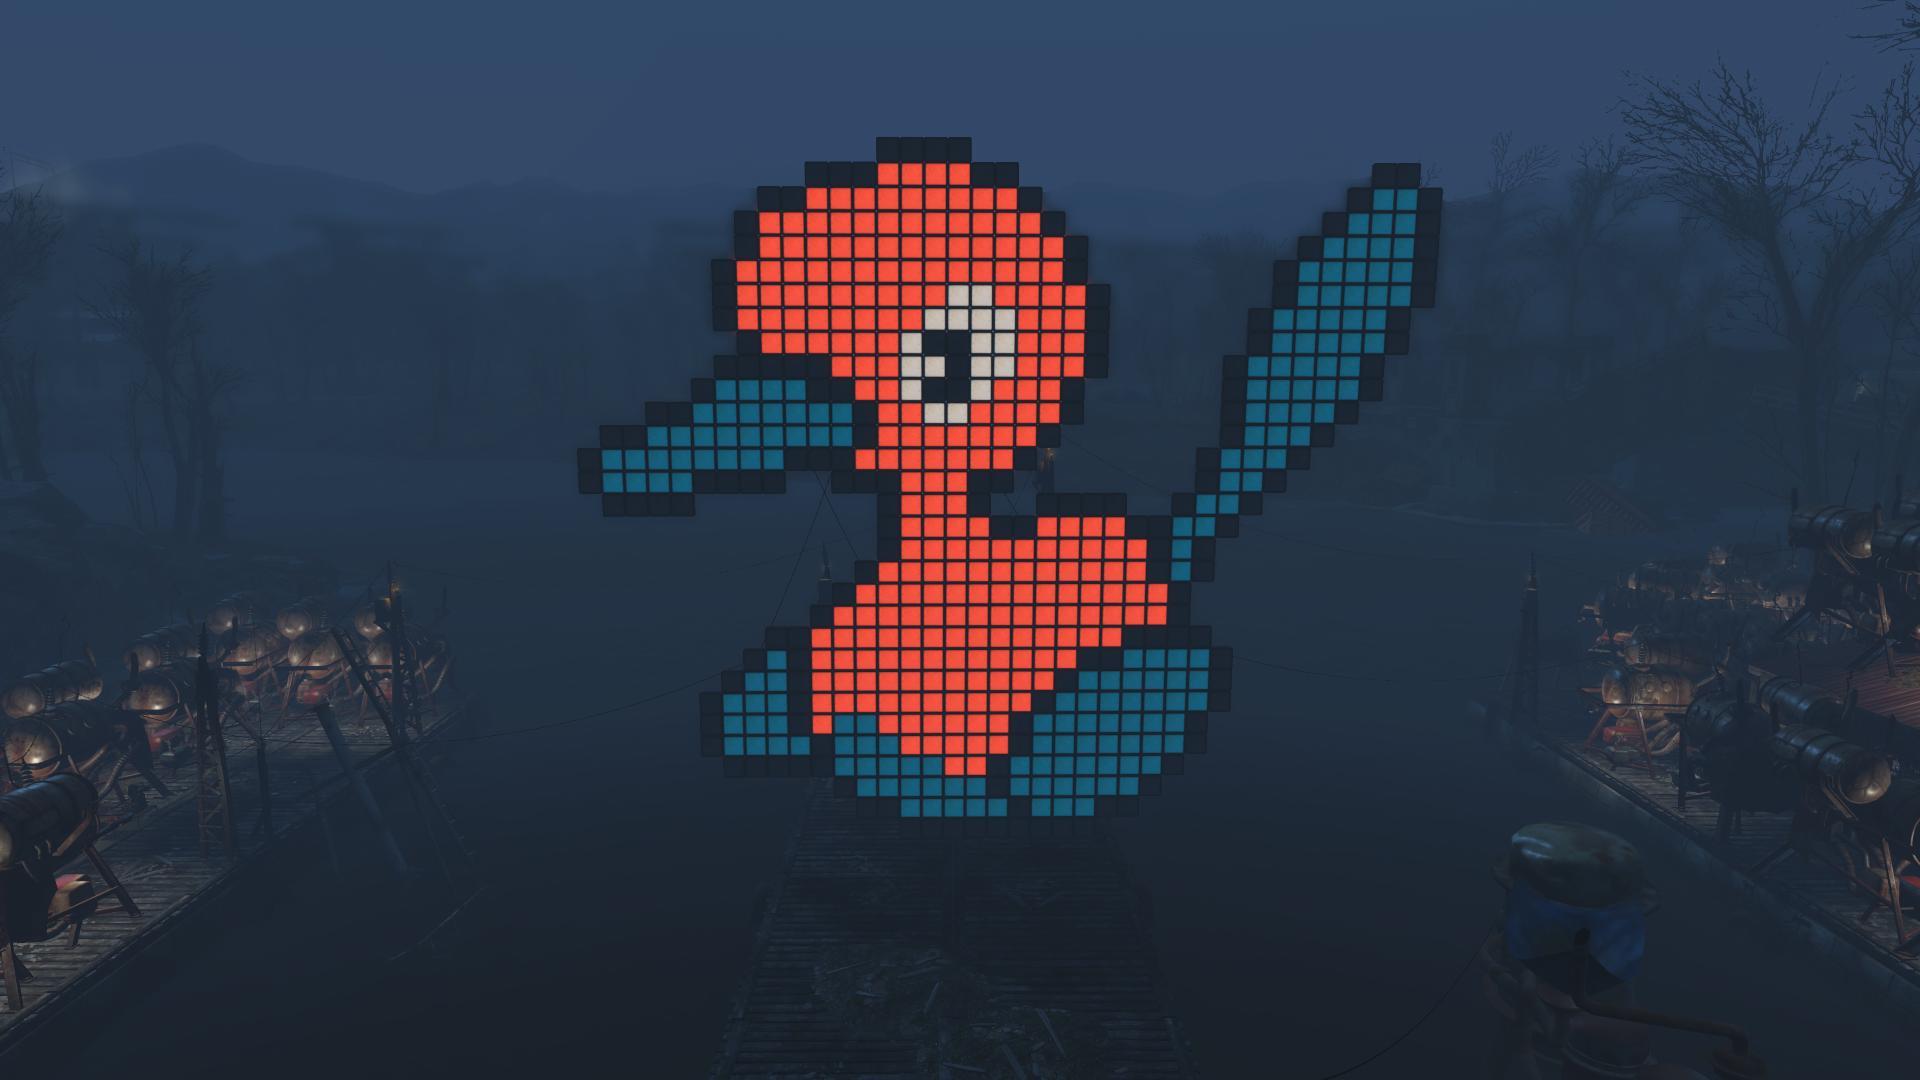 I made my favorite Pokemon with lightboxes - Porygon 2